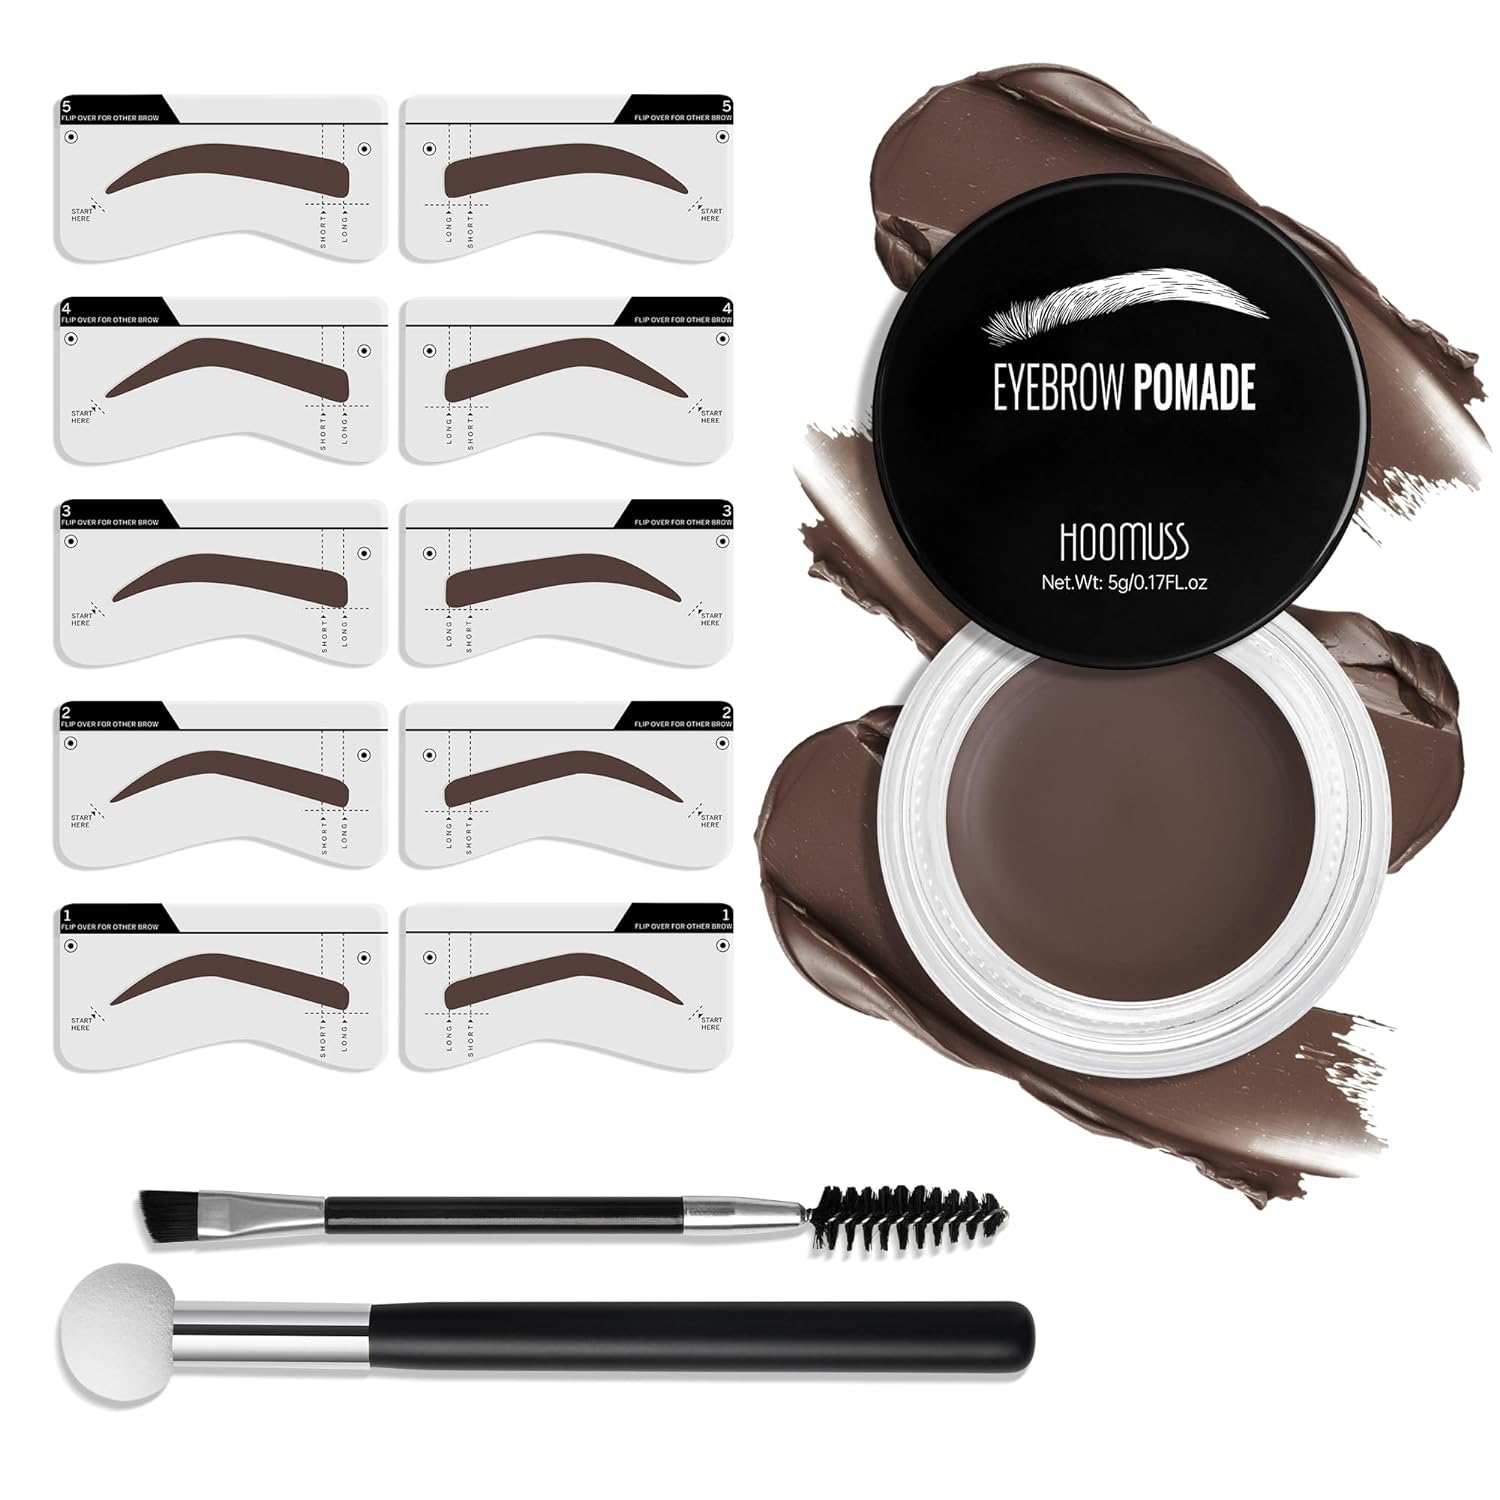 Eyebrow Stamp Stencil Kit, Brow Stamp Trio Kit with Pomade, 10 Eyebrow Stencils, Dual-ended Eyebrow Brush and Sponge Applicator (Dark Brown-B)